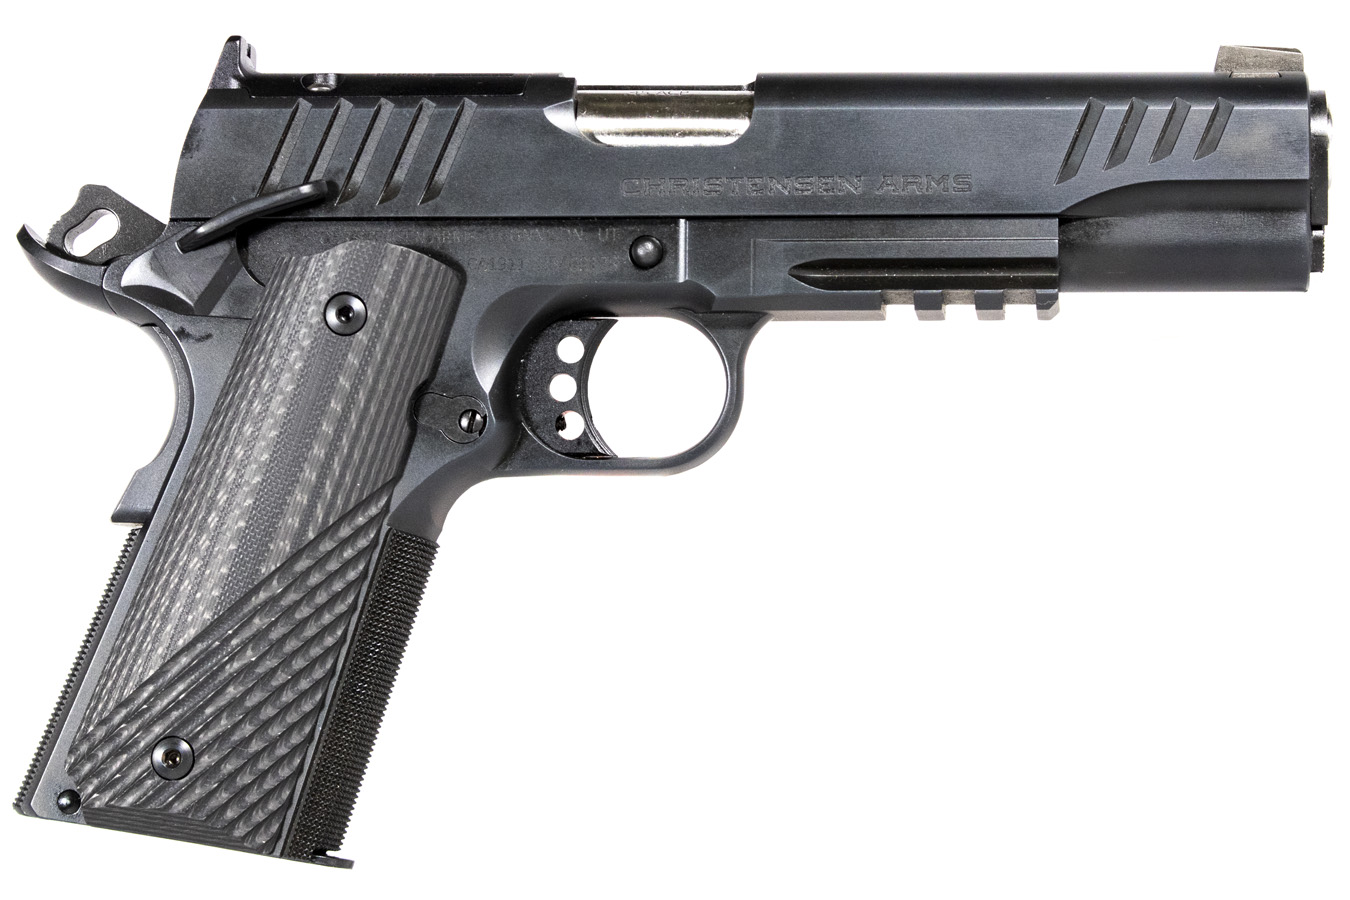 No. 17 Best Selling: CHRISTENSEN ARMS CA1911 45 ACP PISTOL WITH 5 INCH BARREL AND PICATINNY RAIL